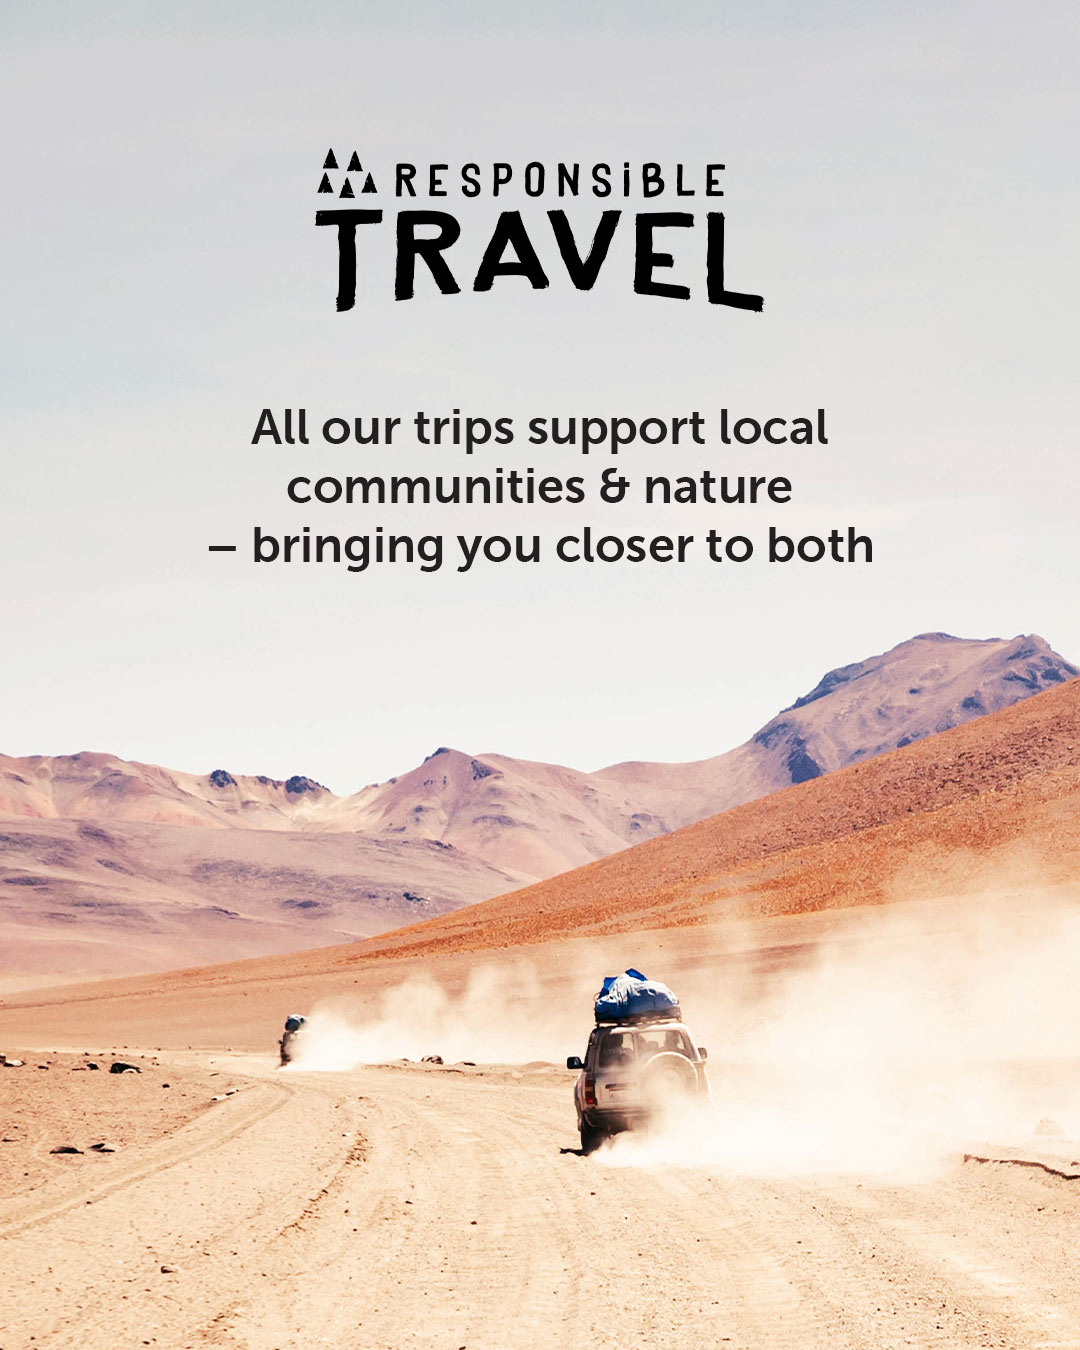 Quote: All our holidays support local communities & nature  bringing you closer to both